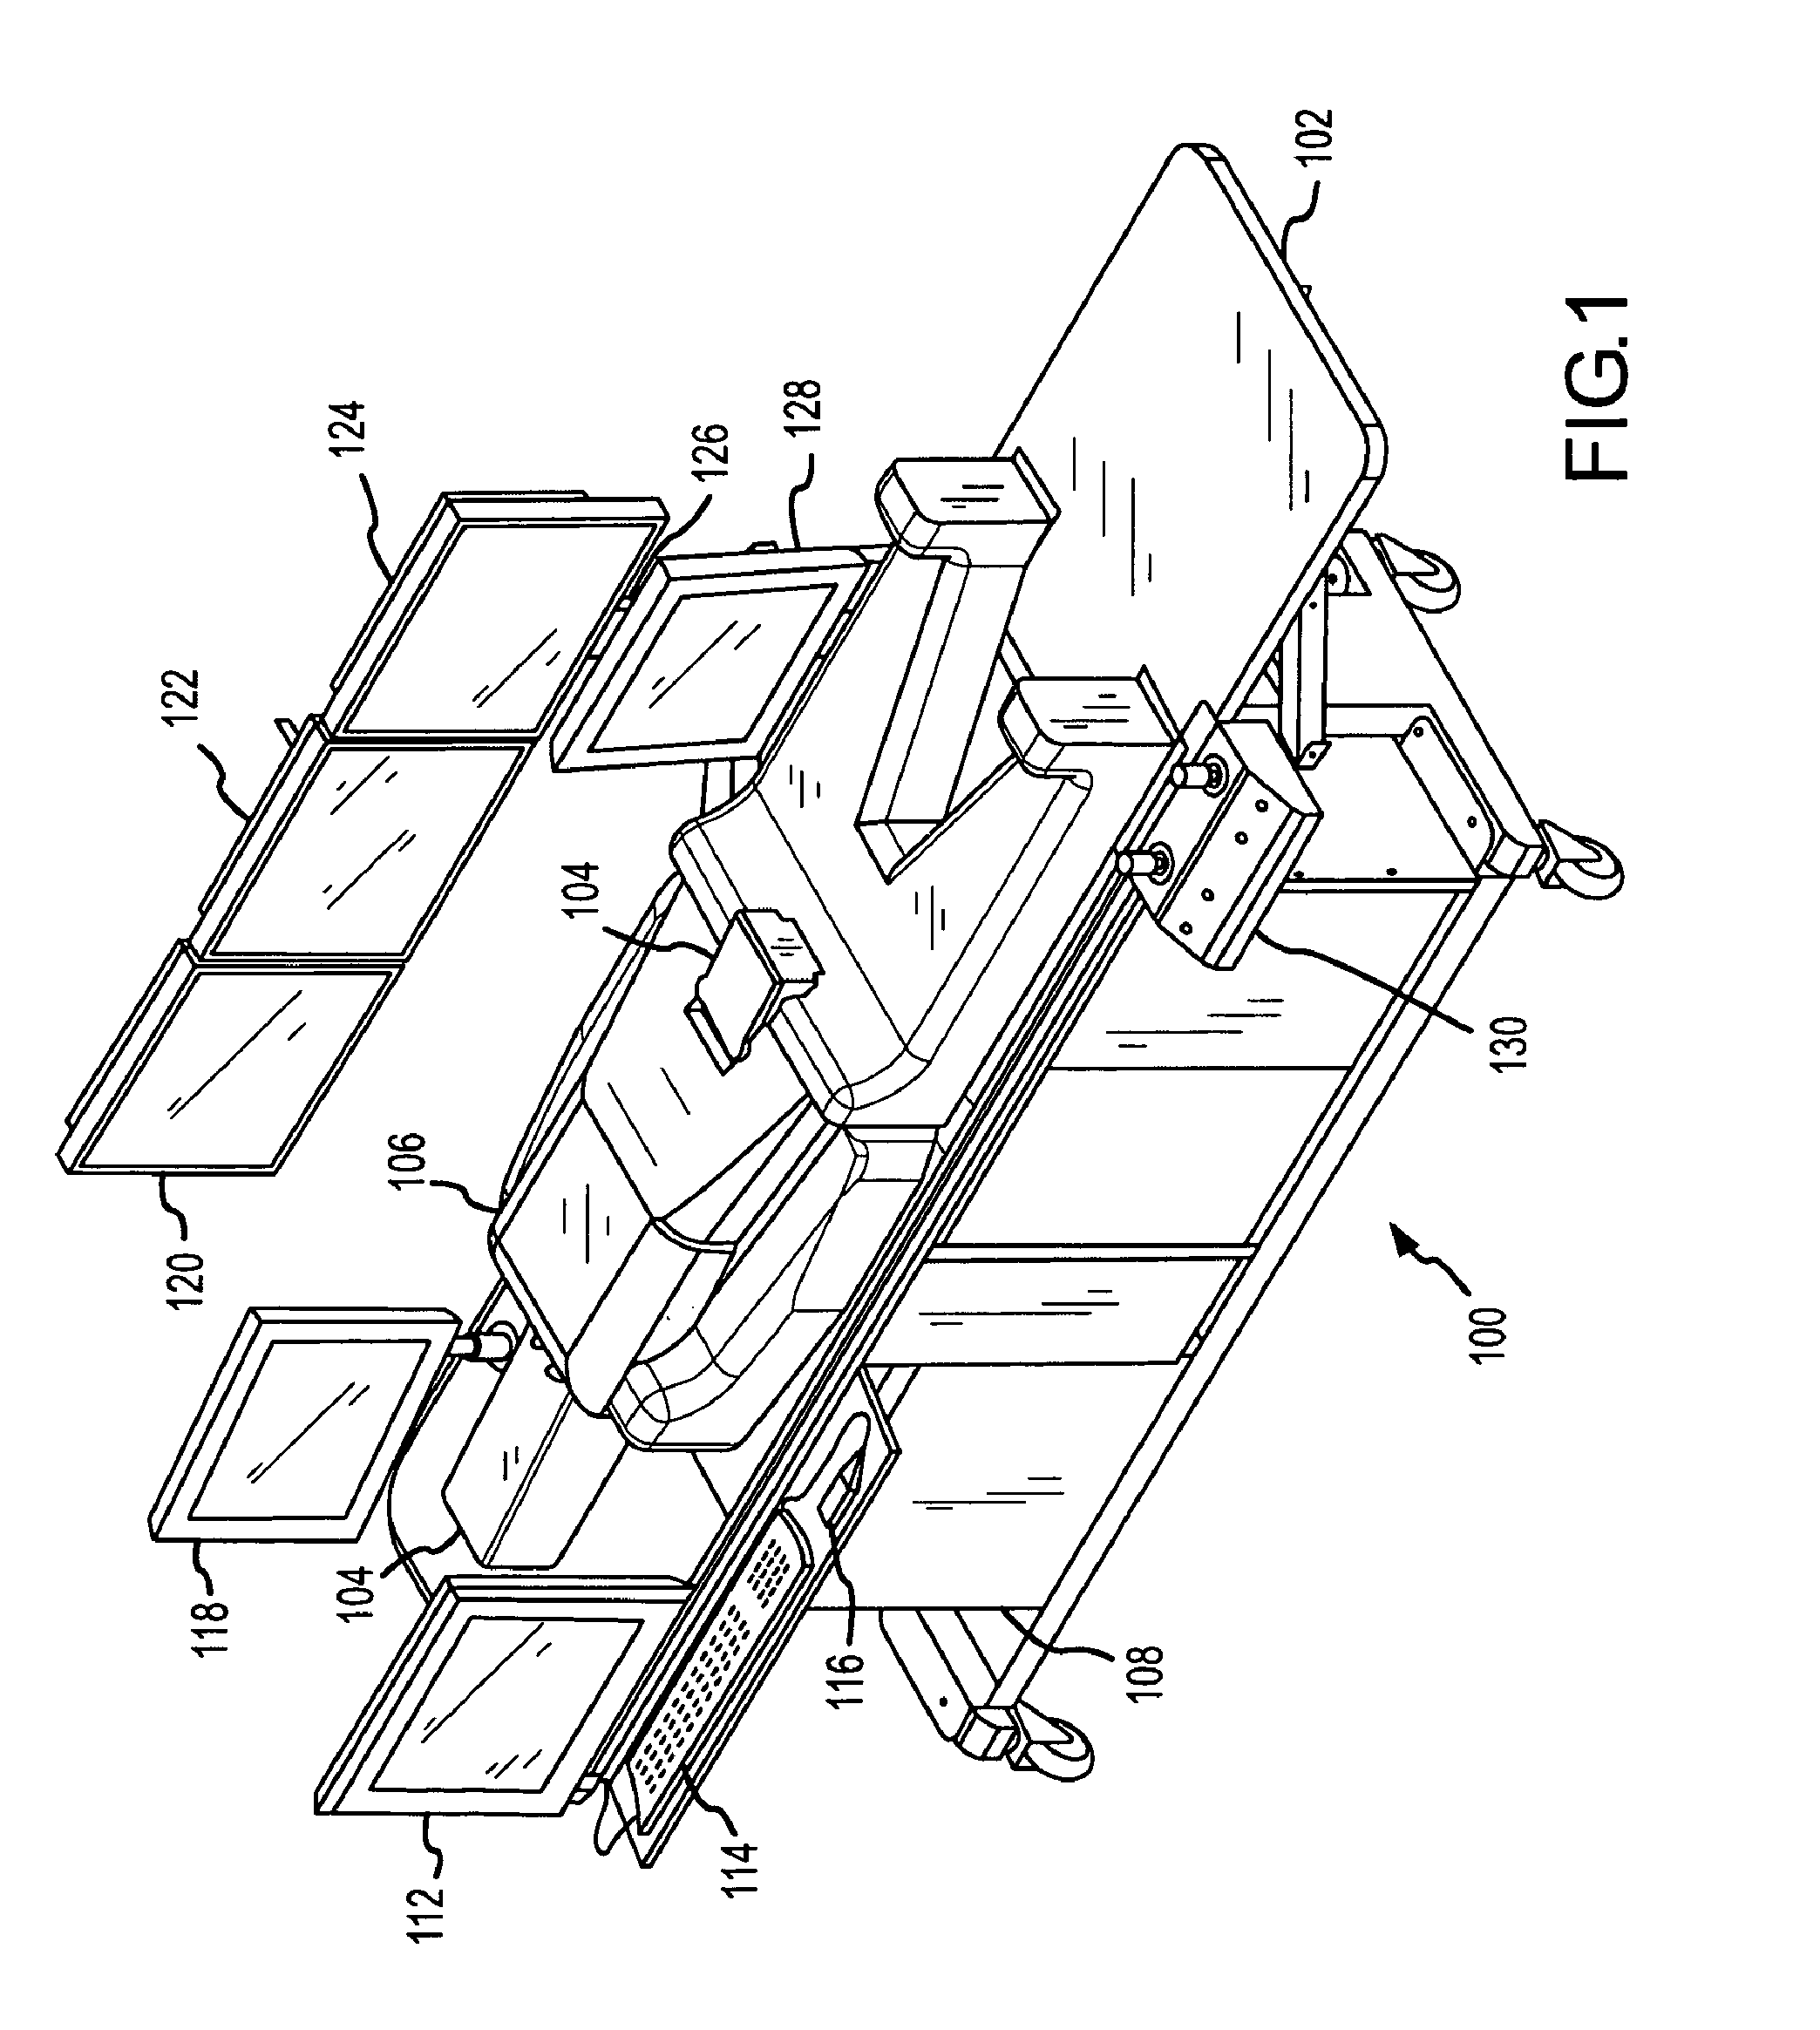 Medical Simulation System and Method